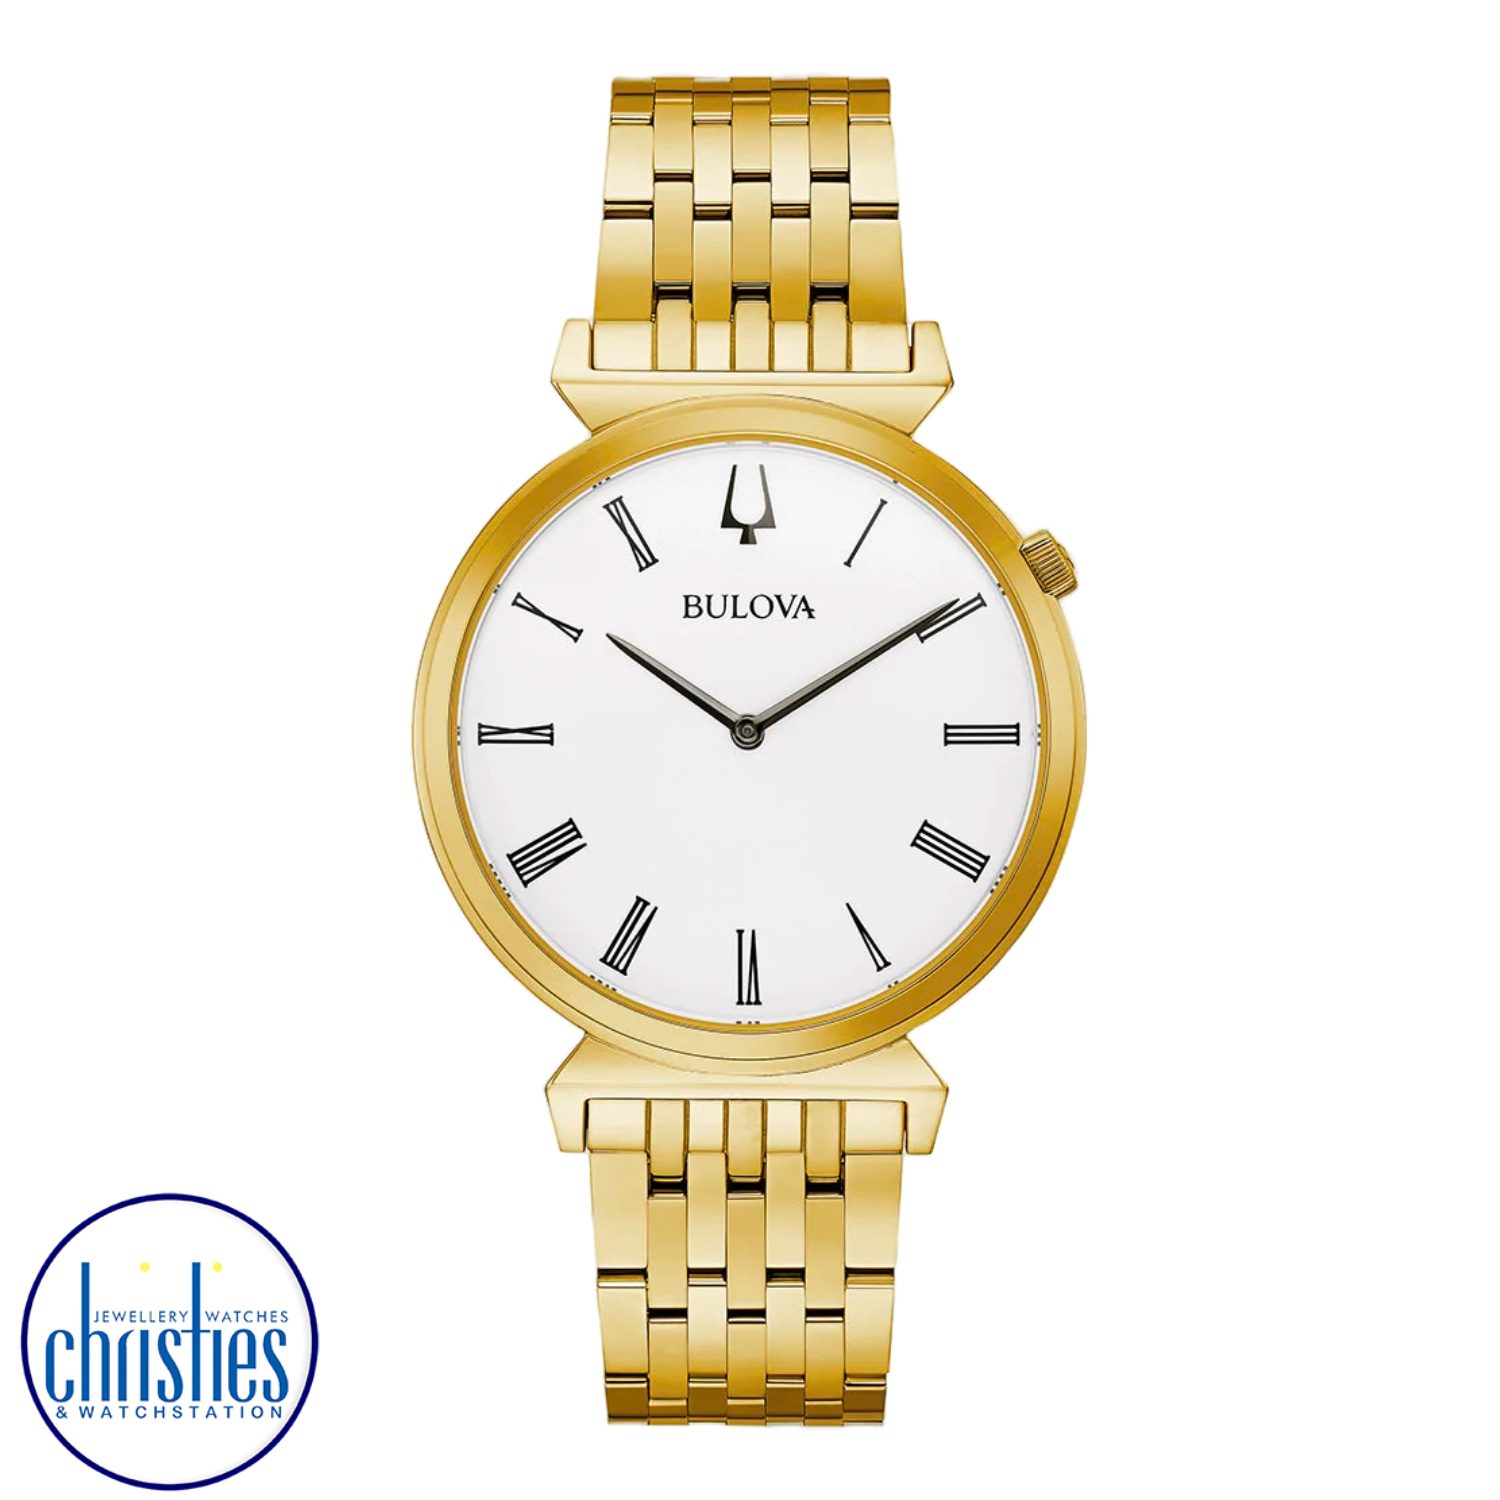 97A153 Bulova Men's Classic Watch. The Bulova Classic, with its gold-tone stainless steel case, is a tribute to the brand's heritage timepieces.